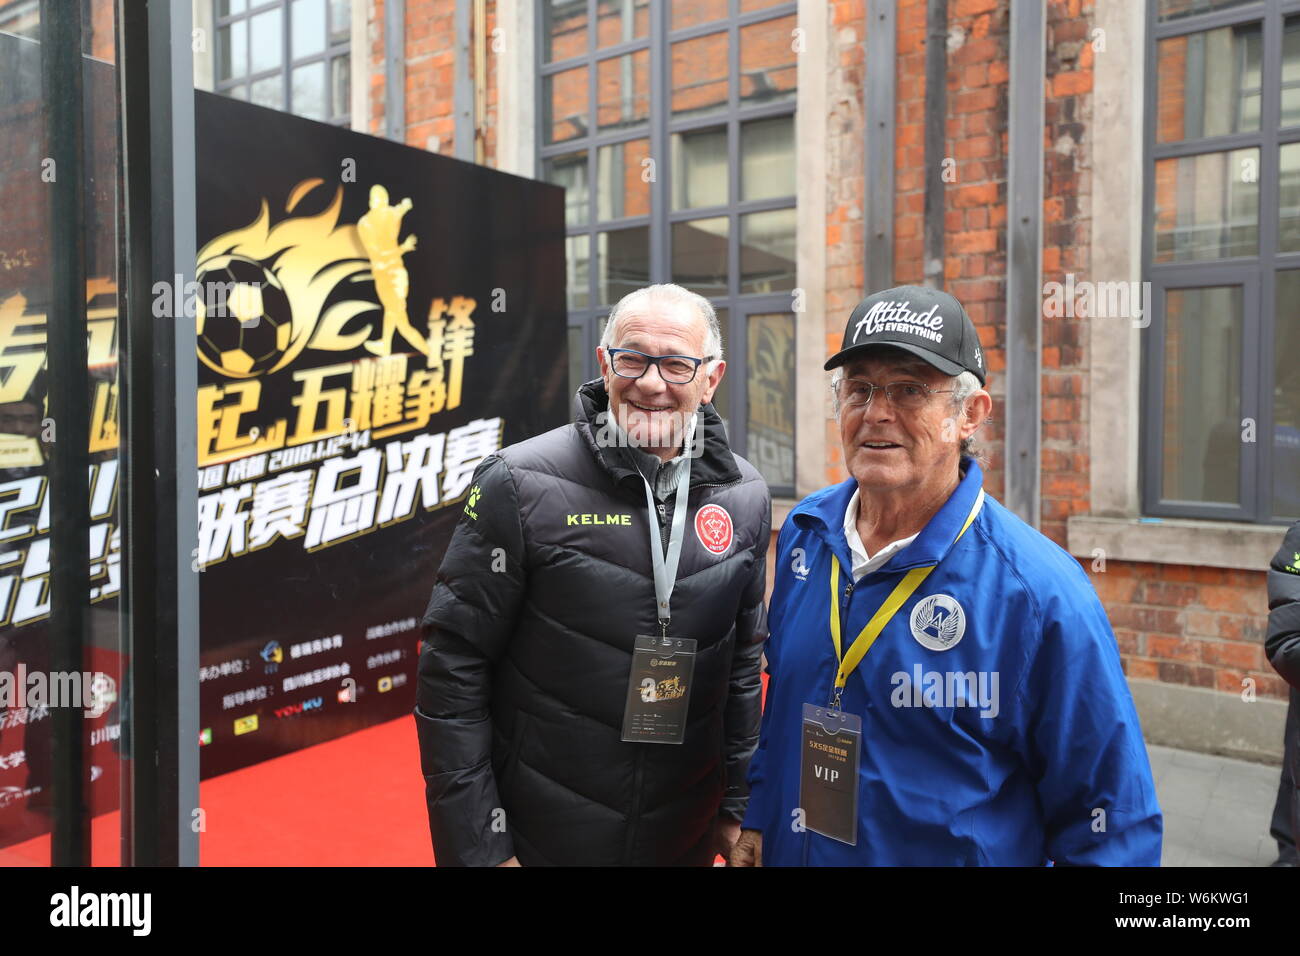 Serbian football coach and former player Bora Milutinovic, right, attends a press conference of Sina 5v5 Football Golden League Finals in Chengdu city Stock Photo